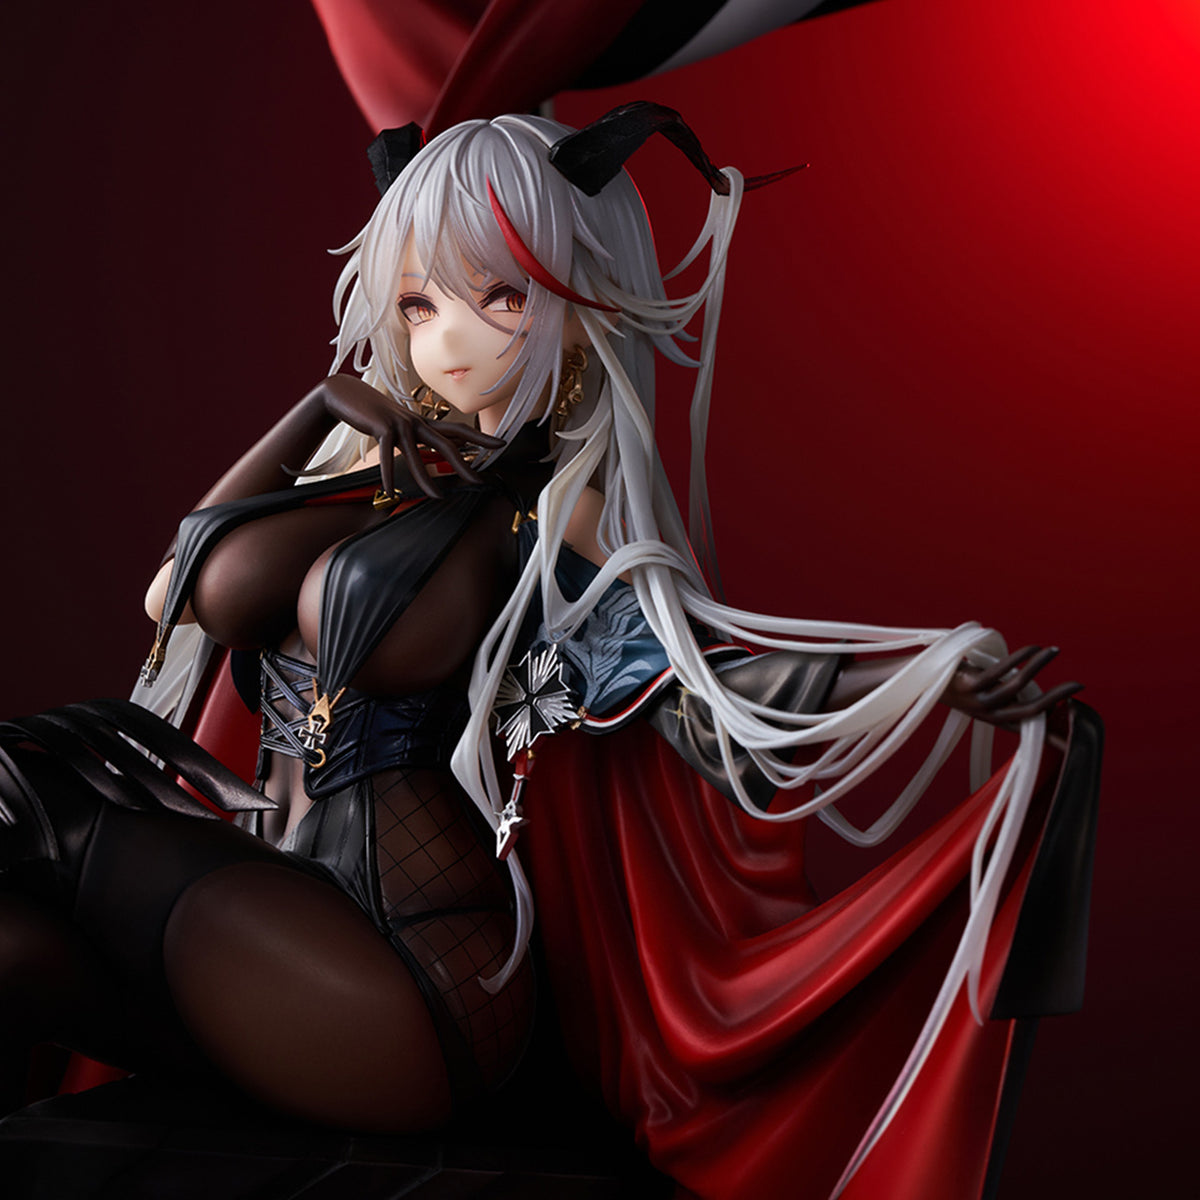 ACTOYS アズールレーン エーギル 軽装Ver. 1/7 開封済み美品 - www ...